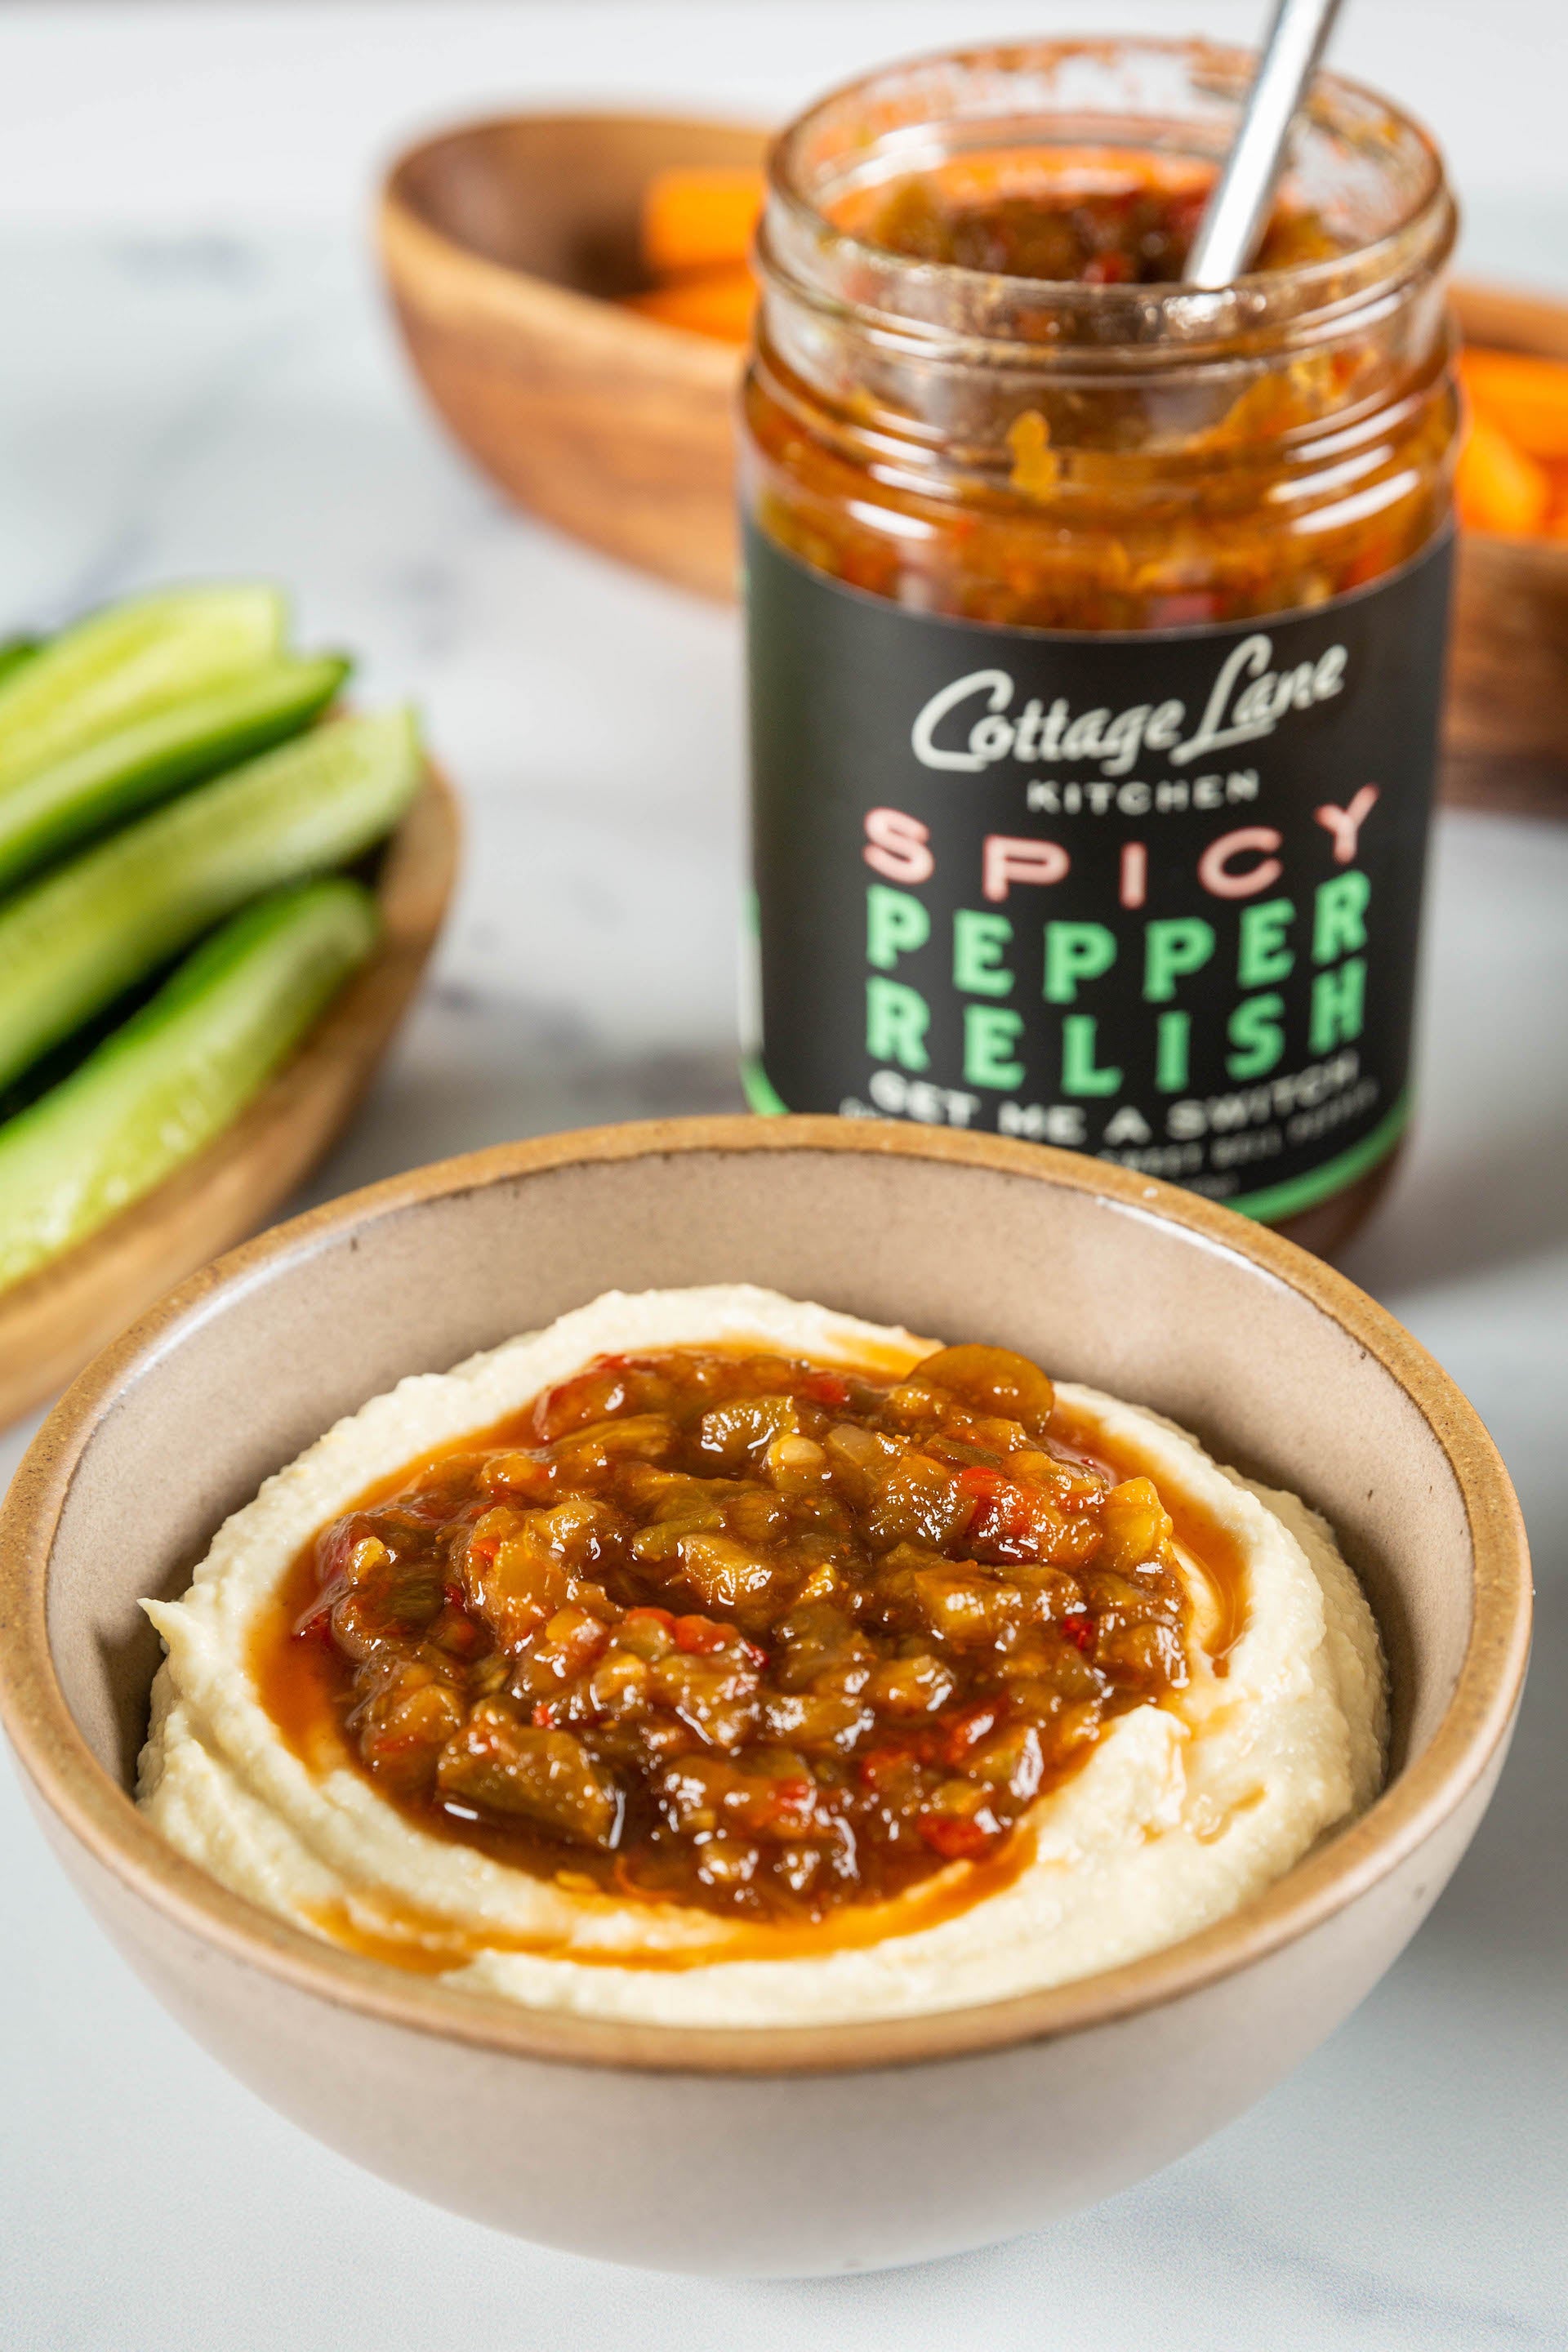 Get Me A Switch Spicy Pepper Relish on Hummus